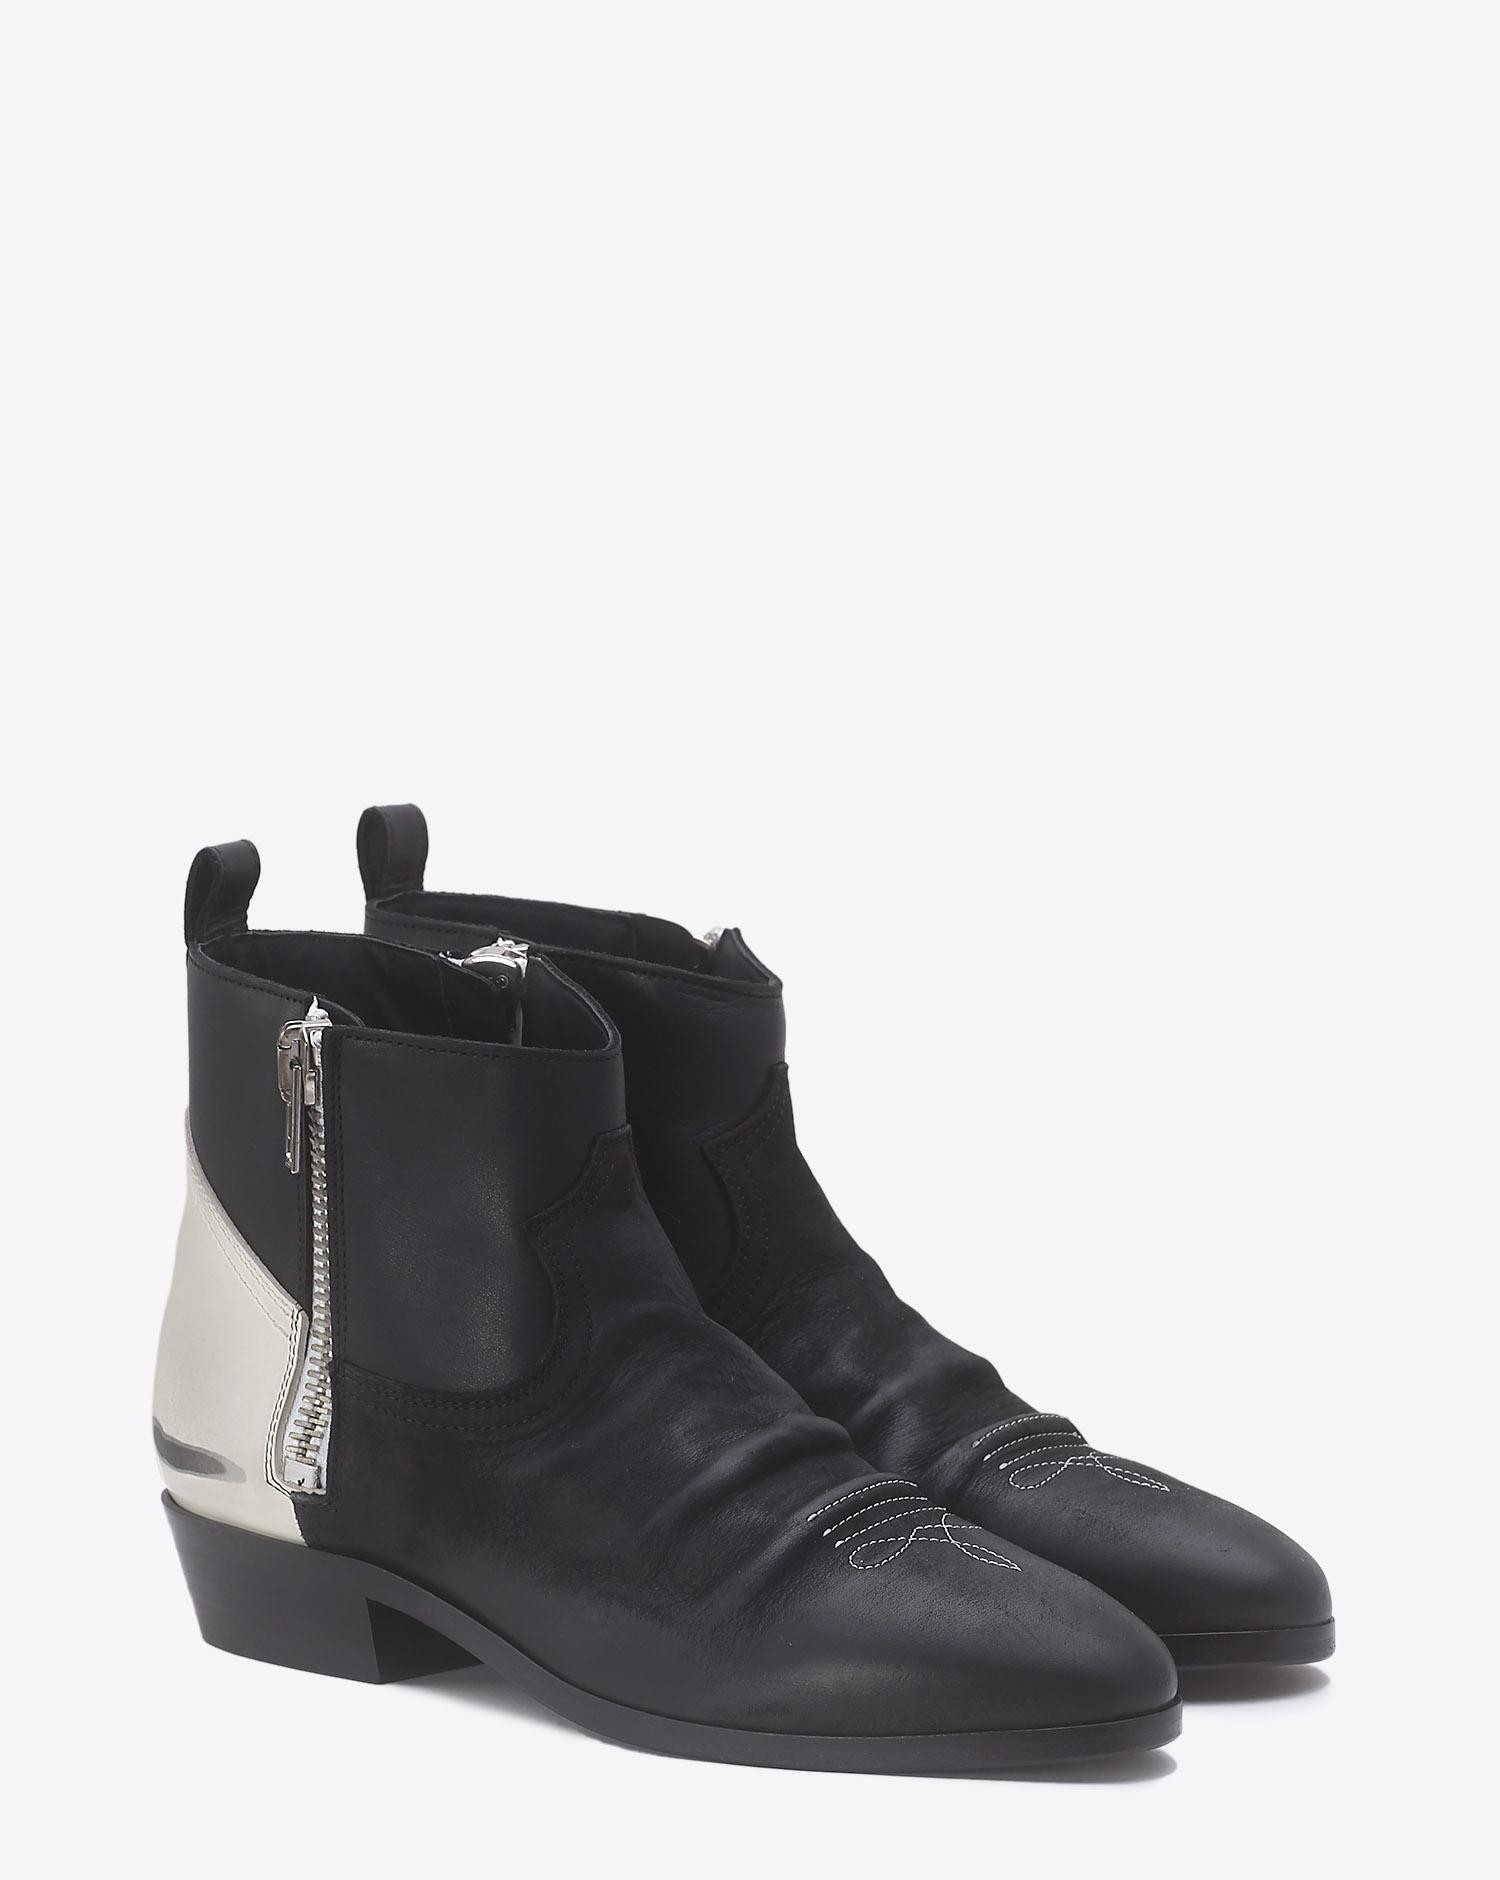 Golden Goose Woman Chaussures Pré-Collection Boots Viand Black And White Leather   